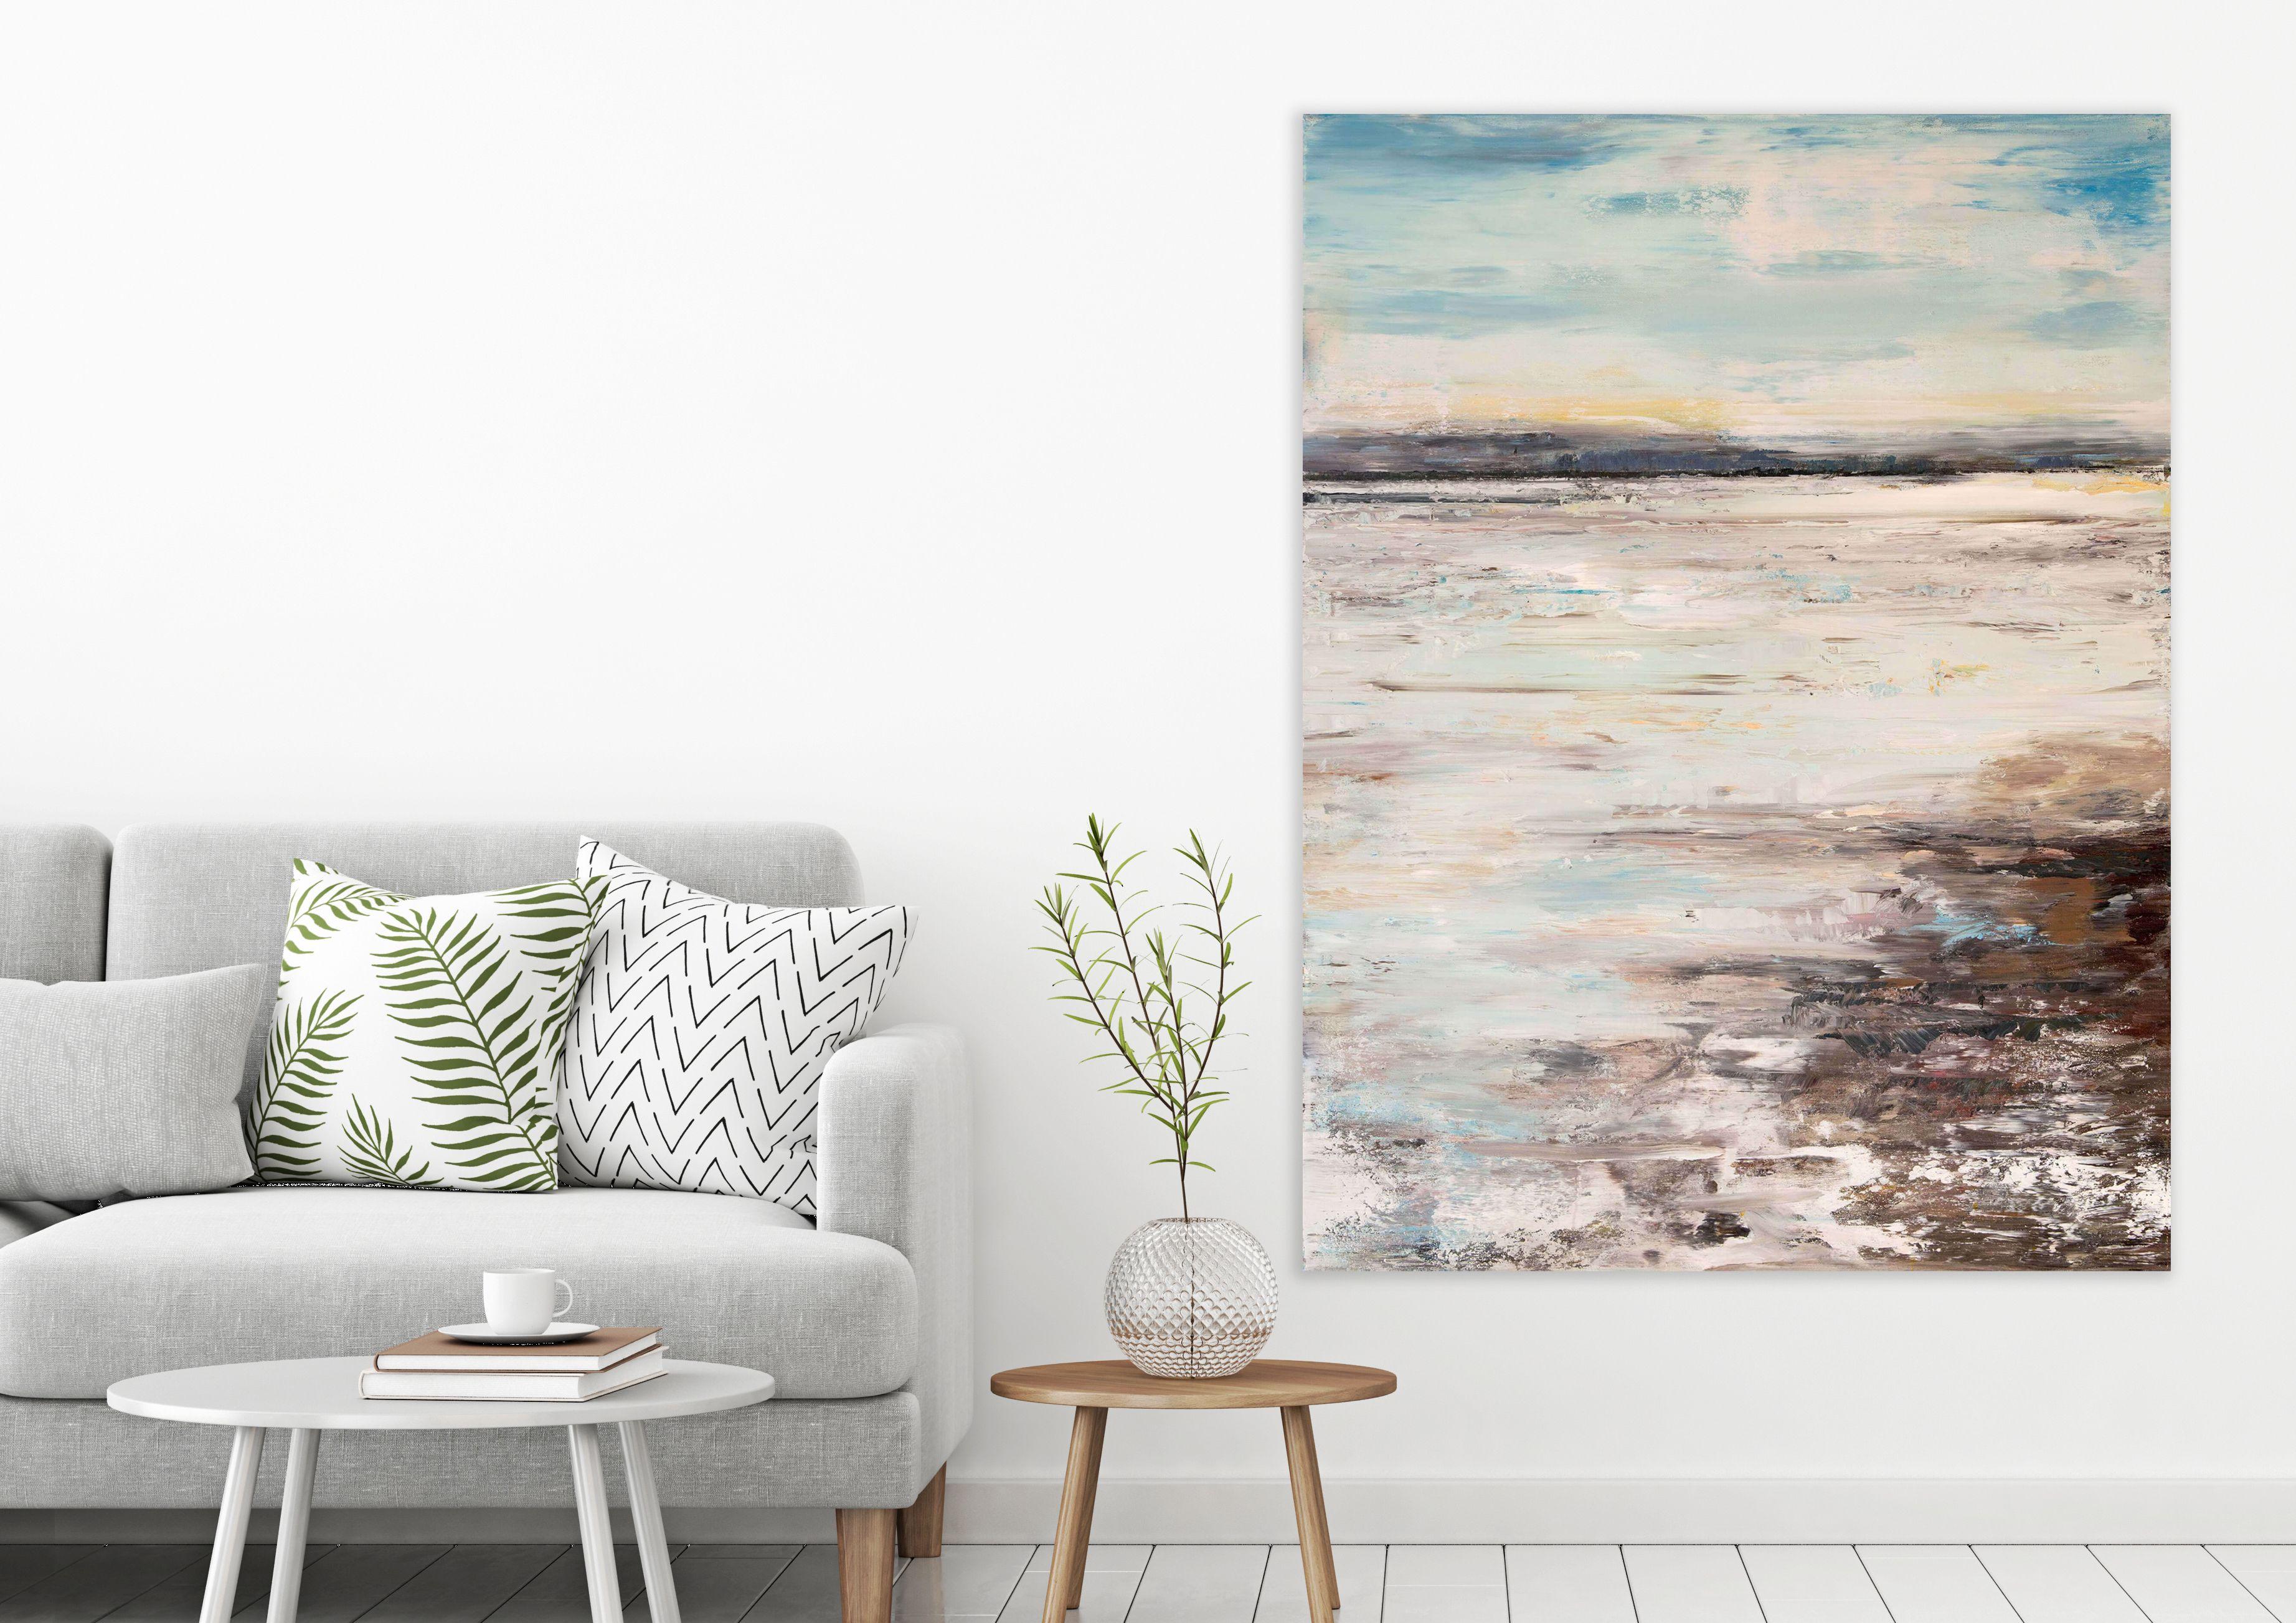 This Contemporary Landscape of Beach is a fine art reproduction with artist hand embellishments of an original hand-painted painting by living American artist John Beard. This piece is made to order in John’s Studio, by John and staff just for you.